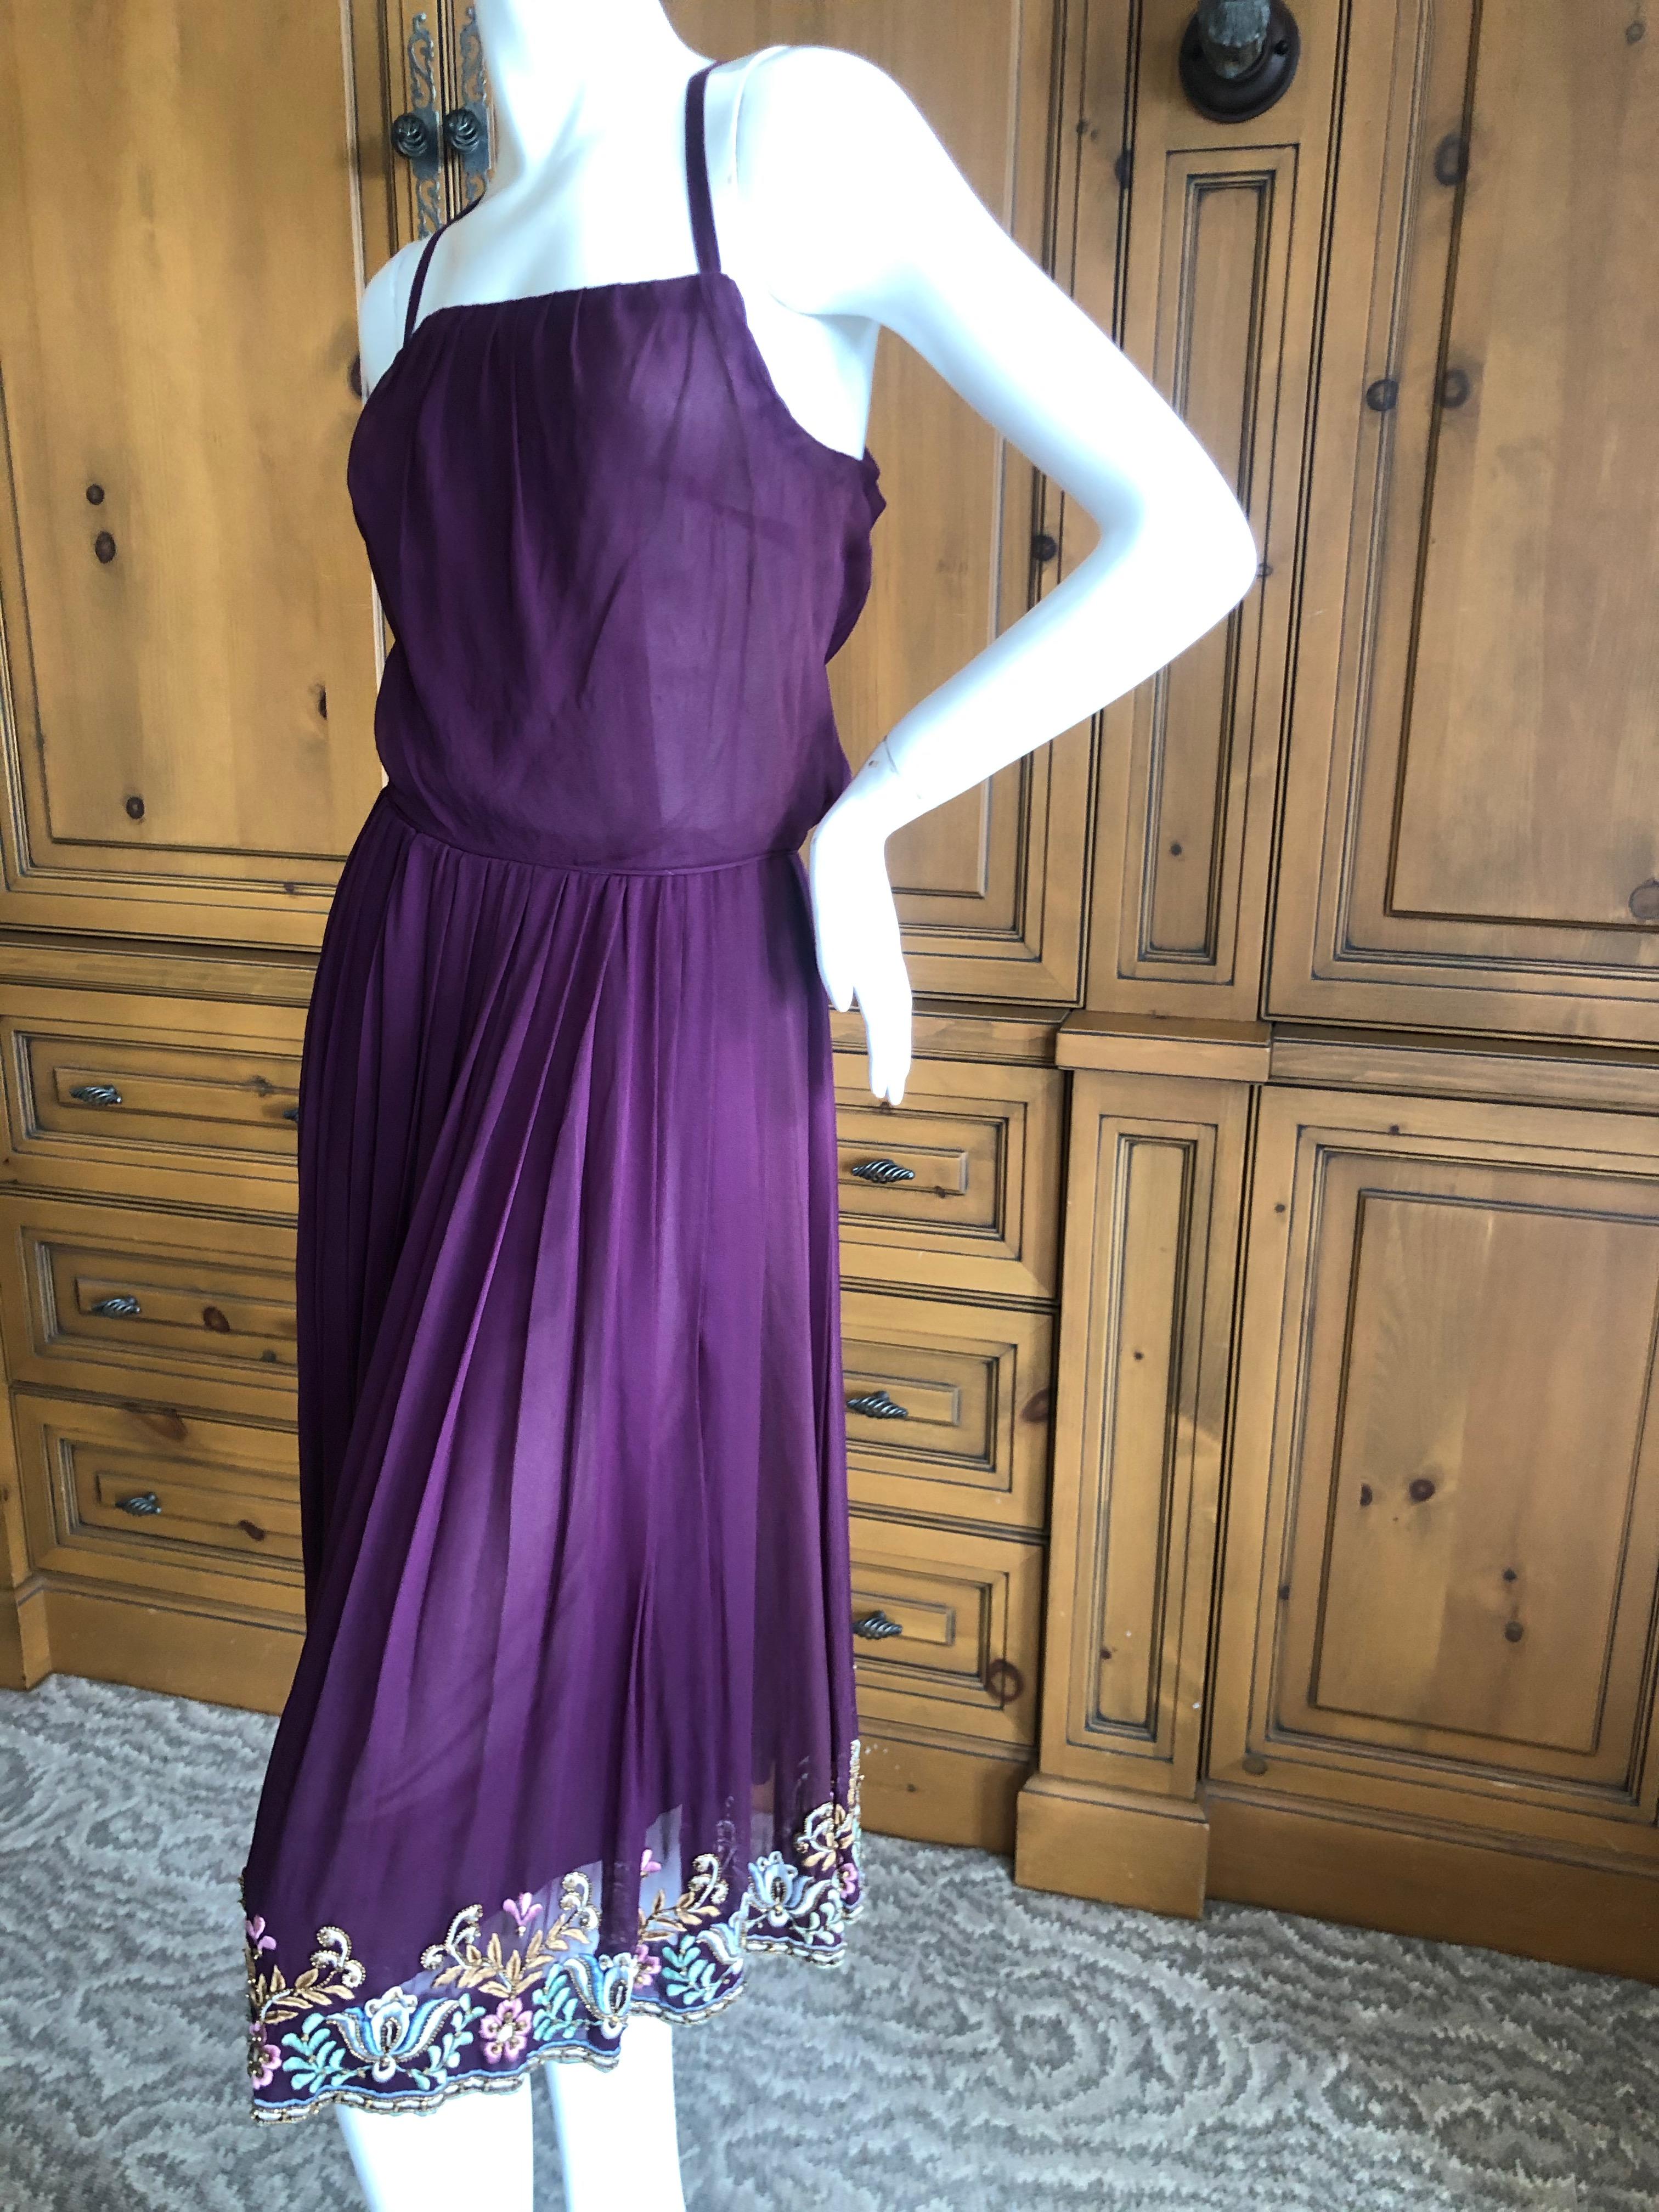 Christian Dior London 1960's Numbered Haute Couture Dress w Lesage Embellishment For Sale 1